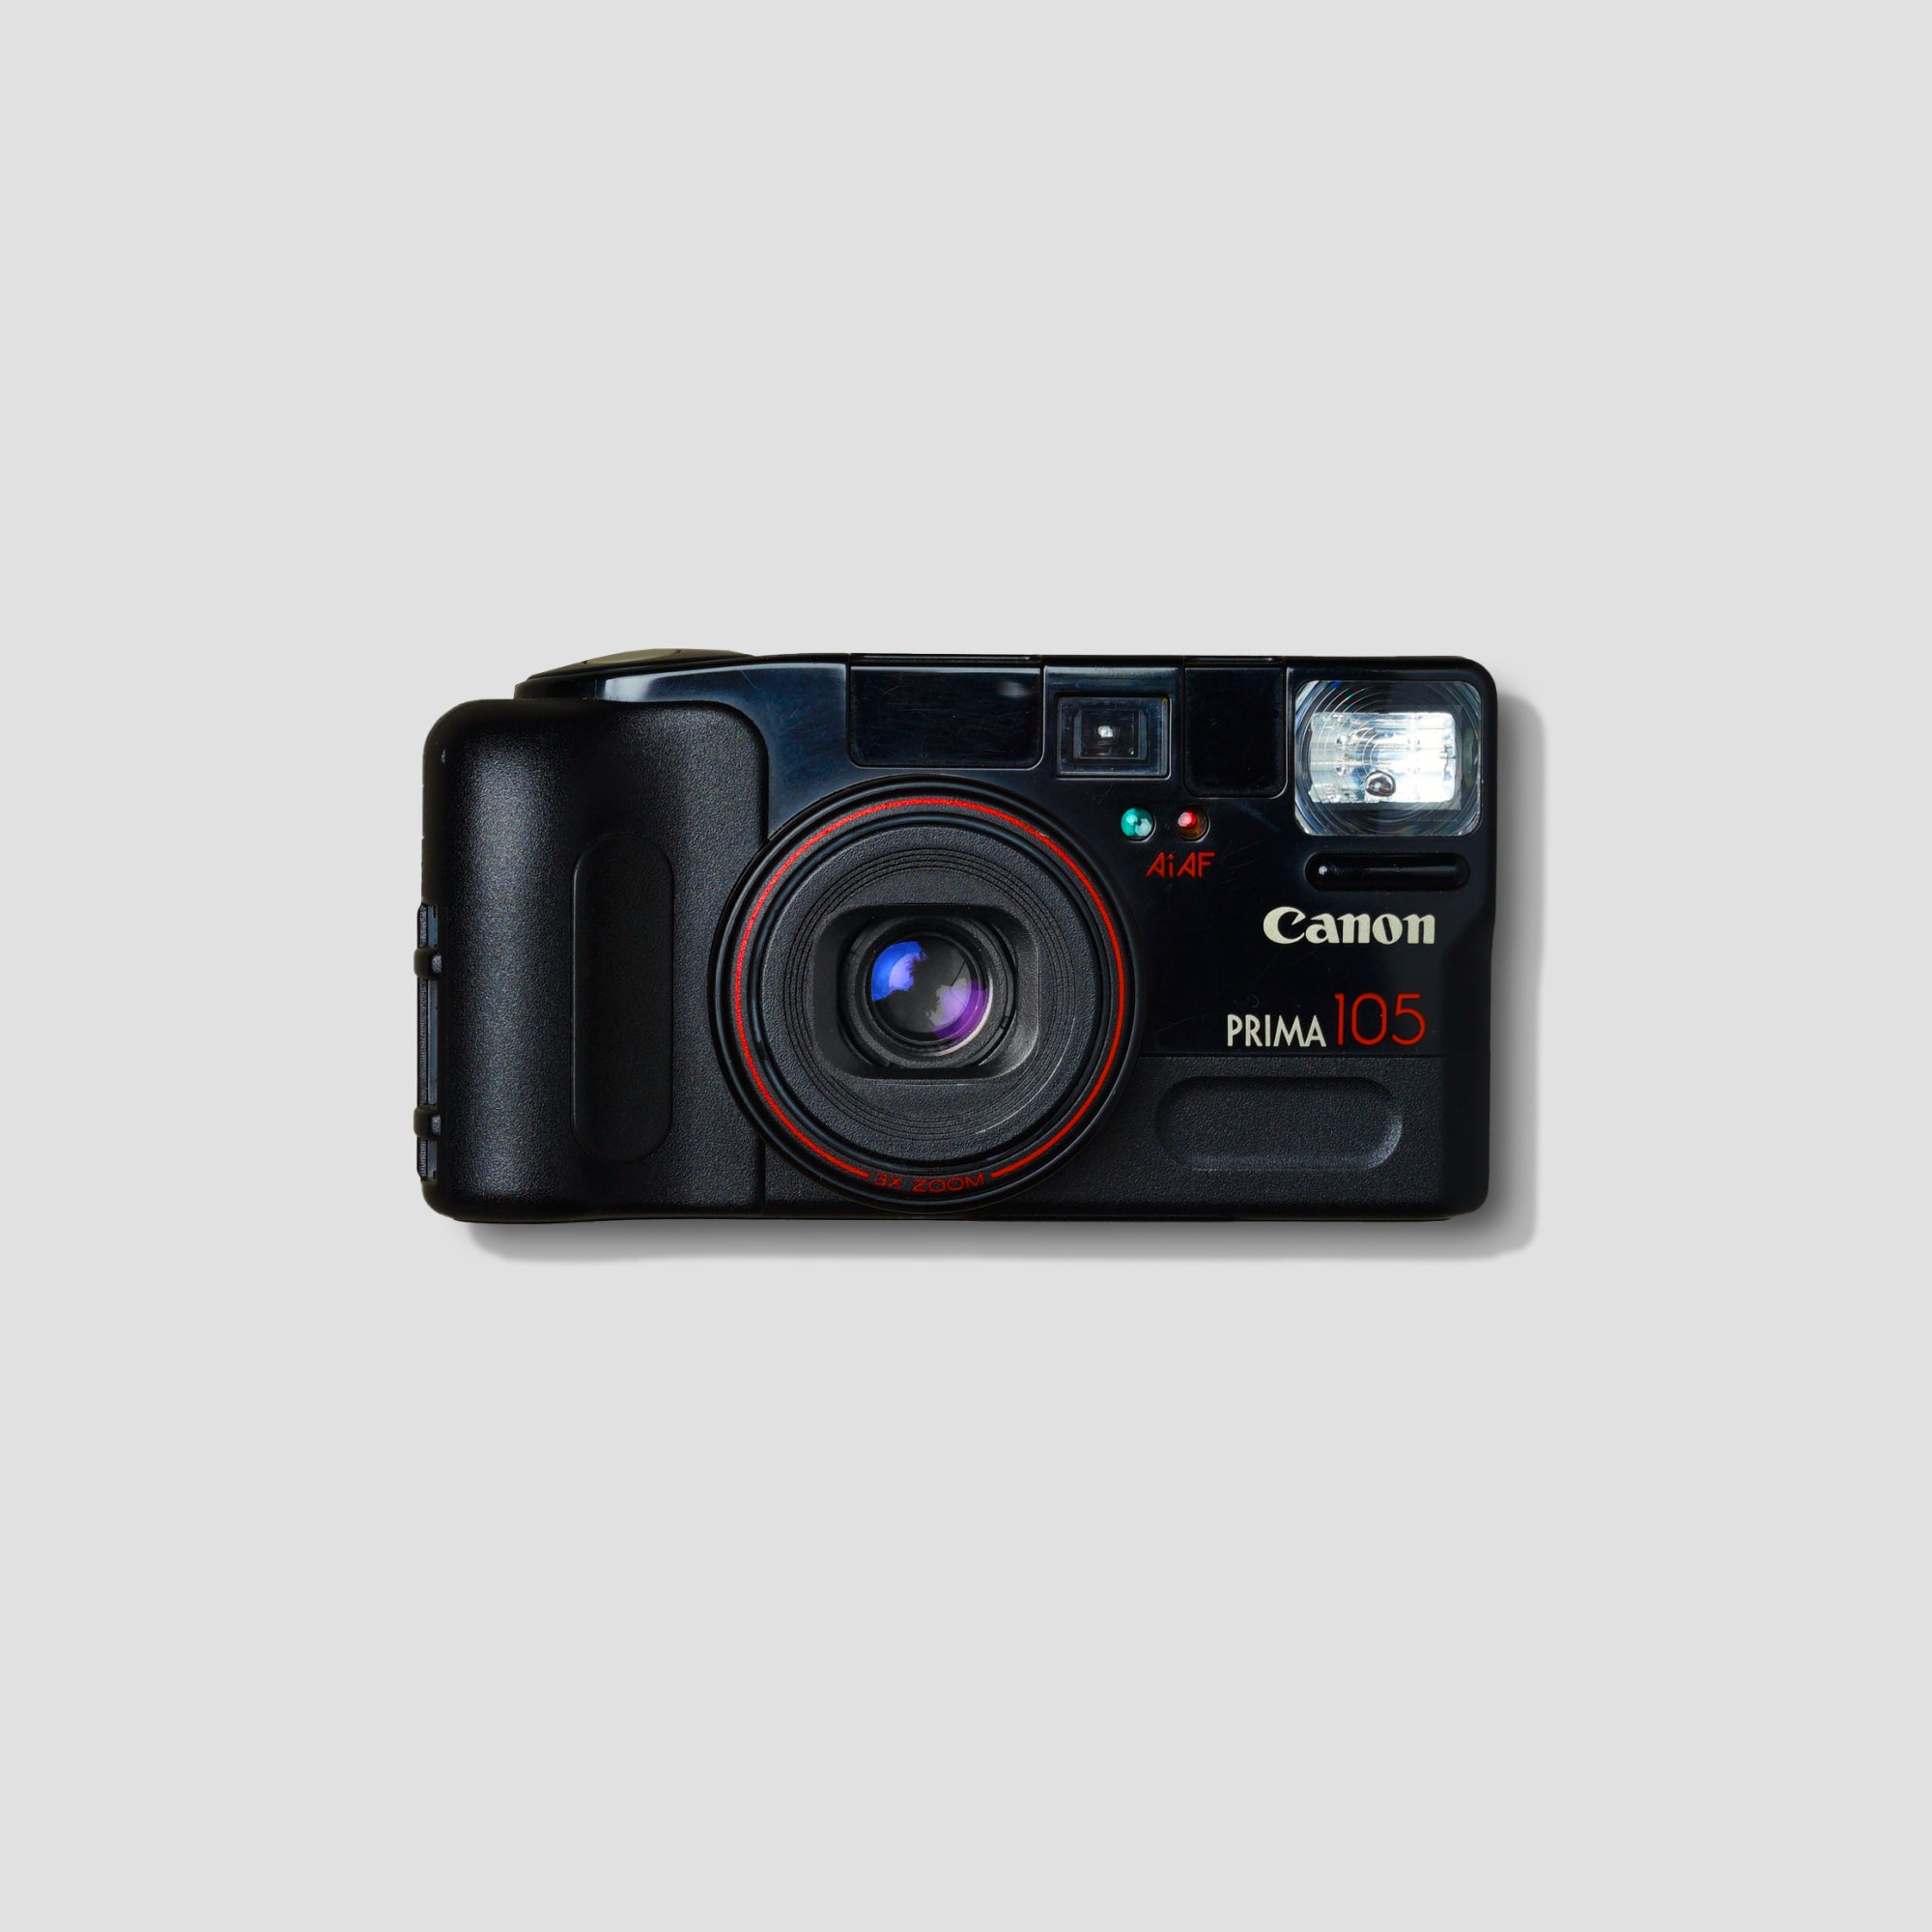 Buy Canon Prima Zoom 105 now at Analogue Amsterdam